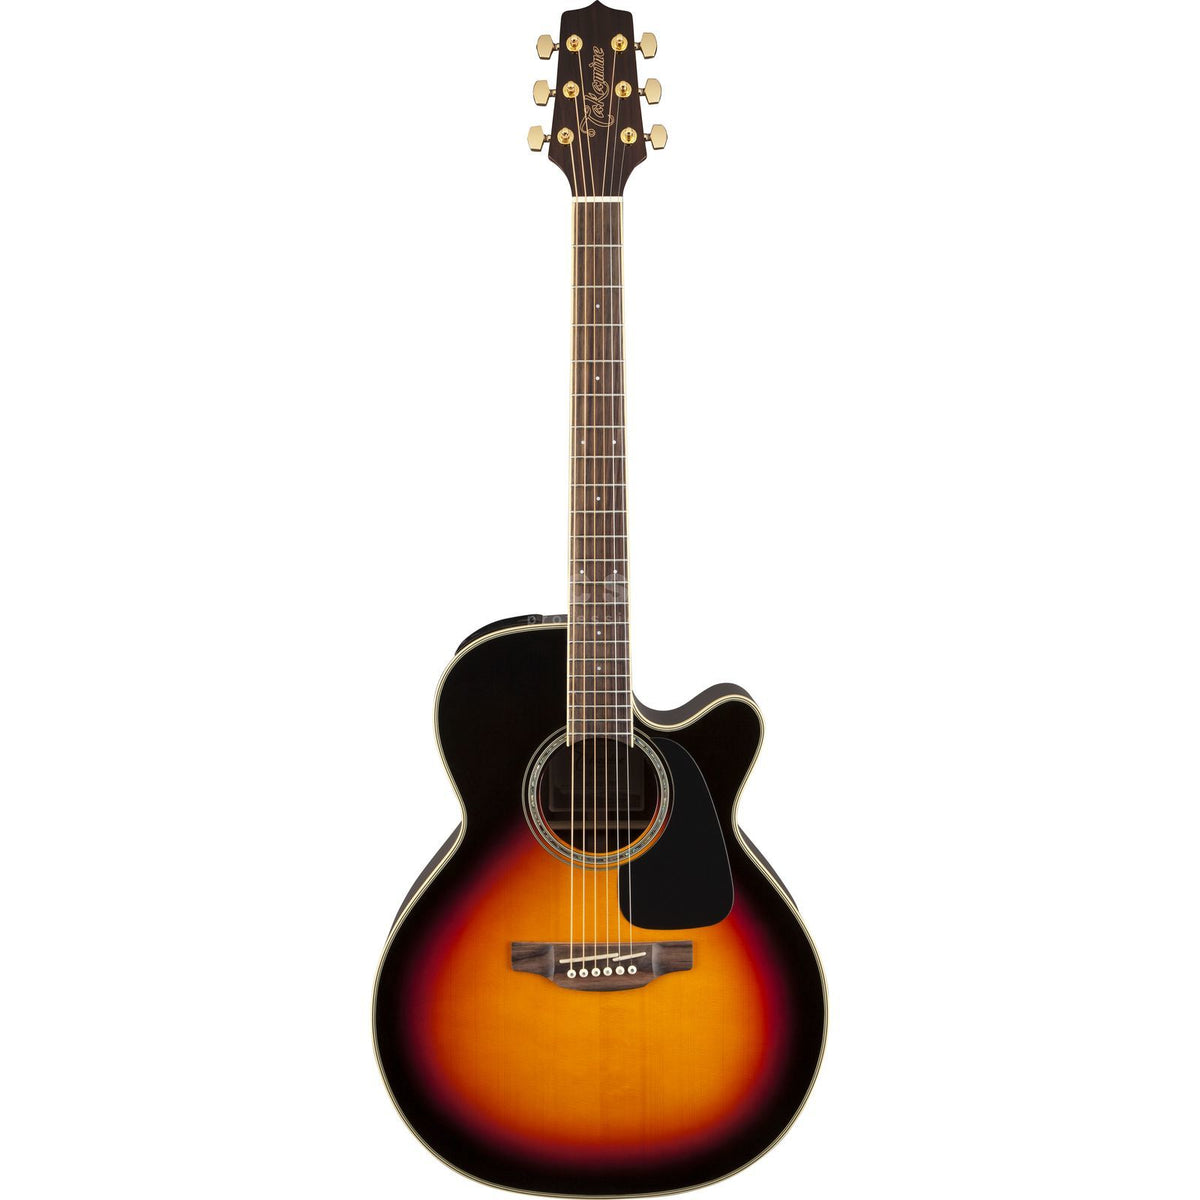 Takamine Guitars are now available here in Danny Ryan Music Shop